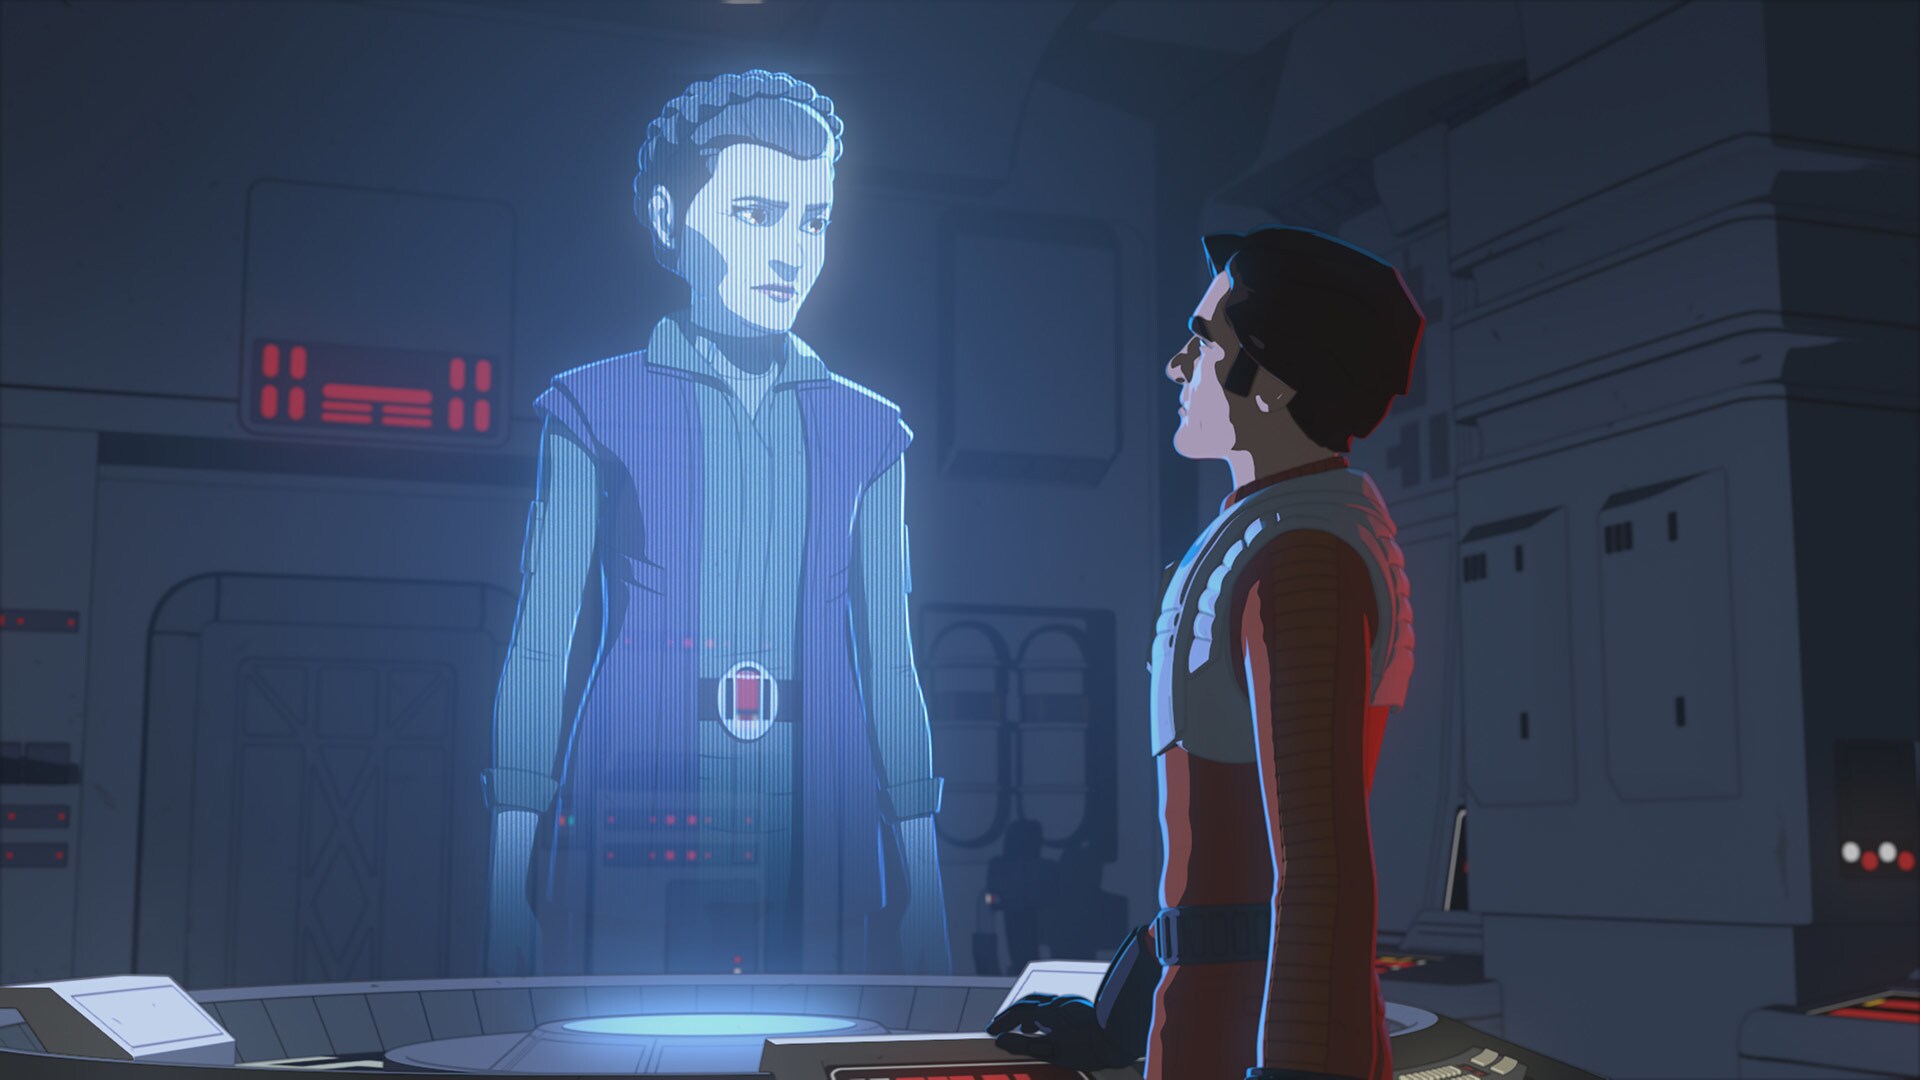 While prowling around the ship, Kaz stumbles into a secret meeting between General Leia Organa an...